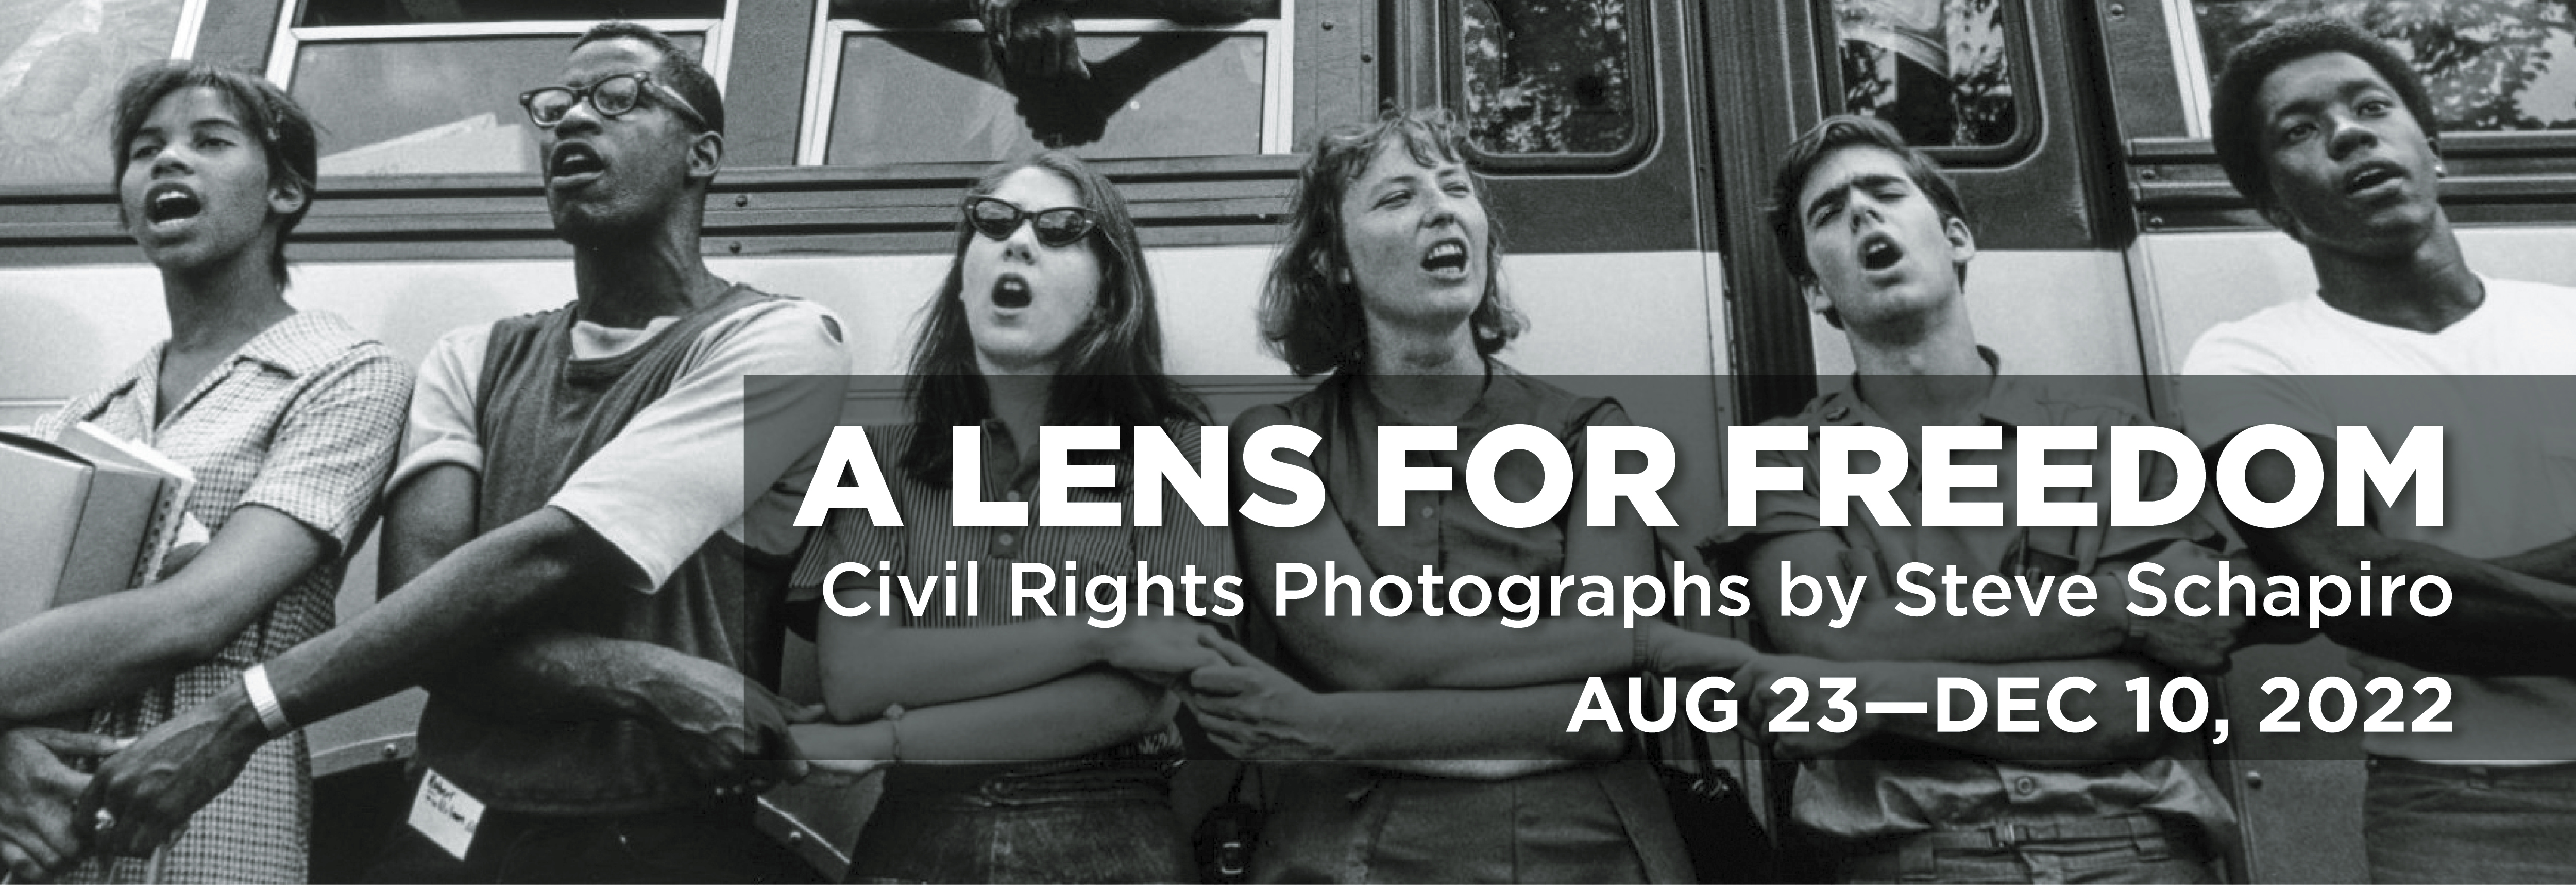 A Lens for Freedom Exhibition Aug 25-Dec 10, 2022